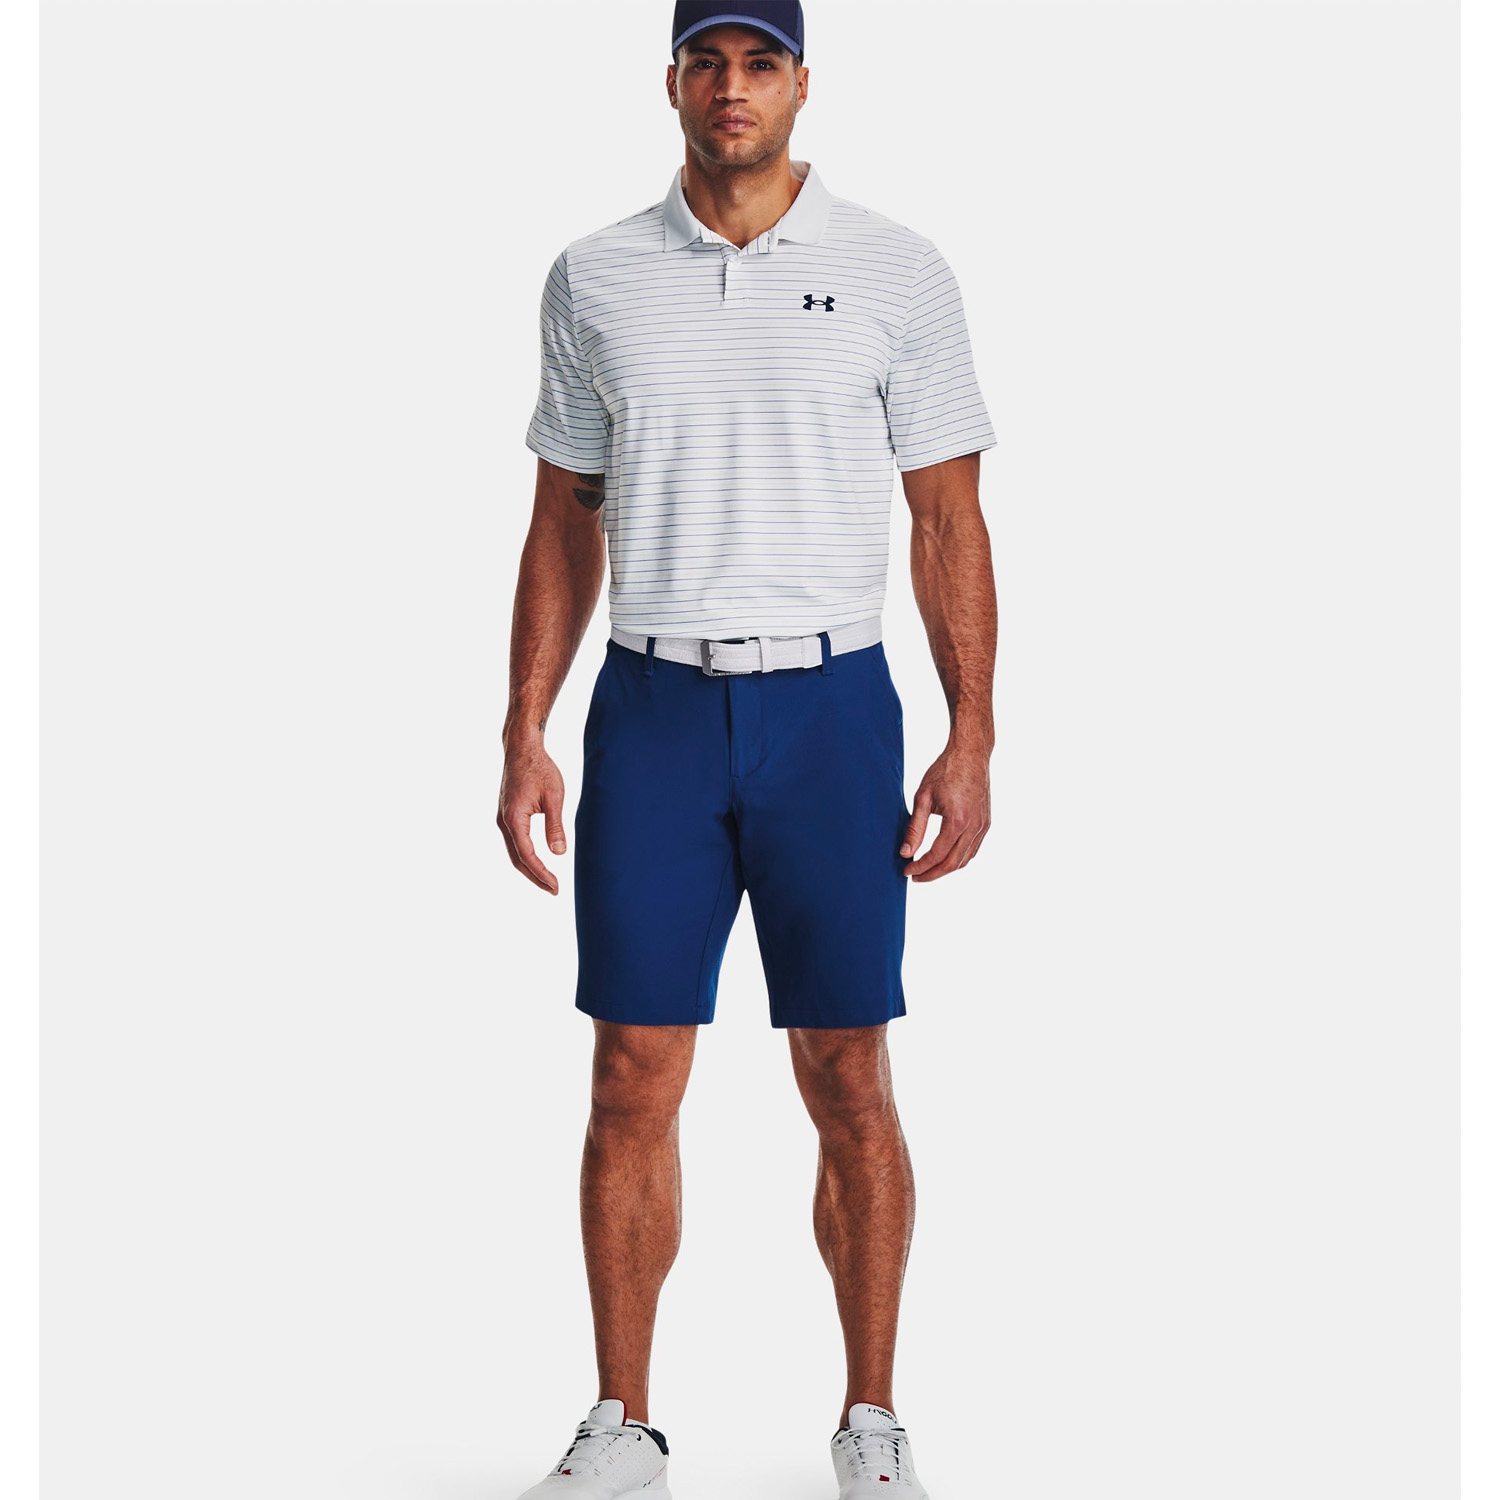 Under Armour Drive Shorts - White